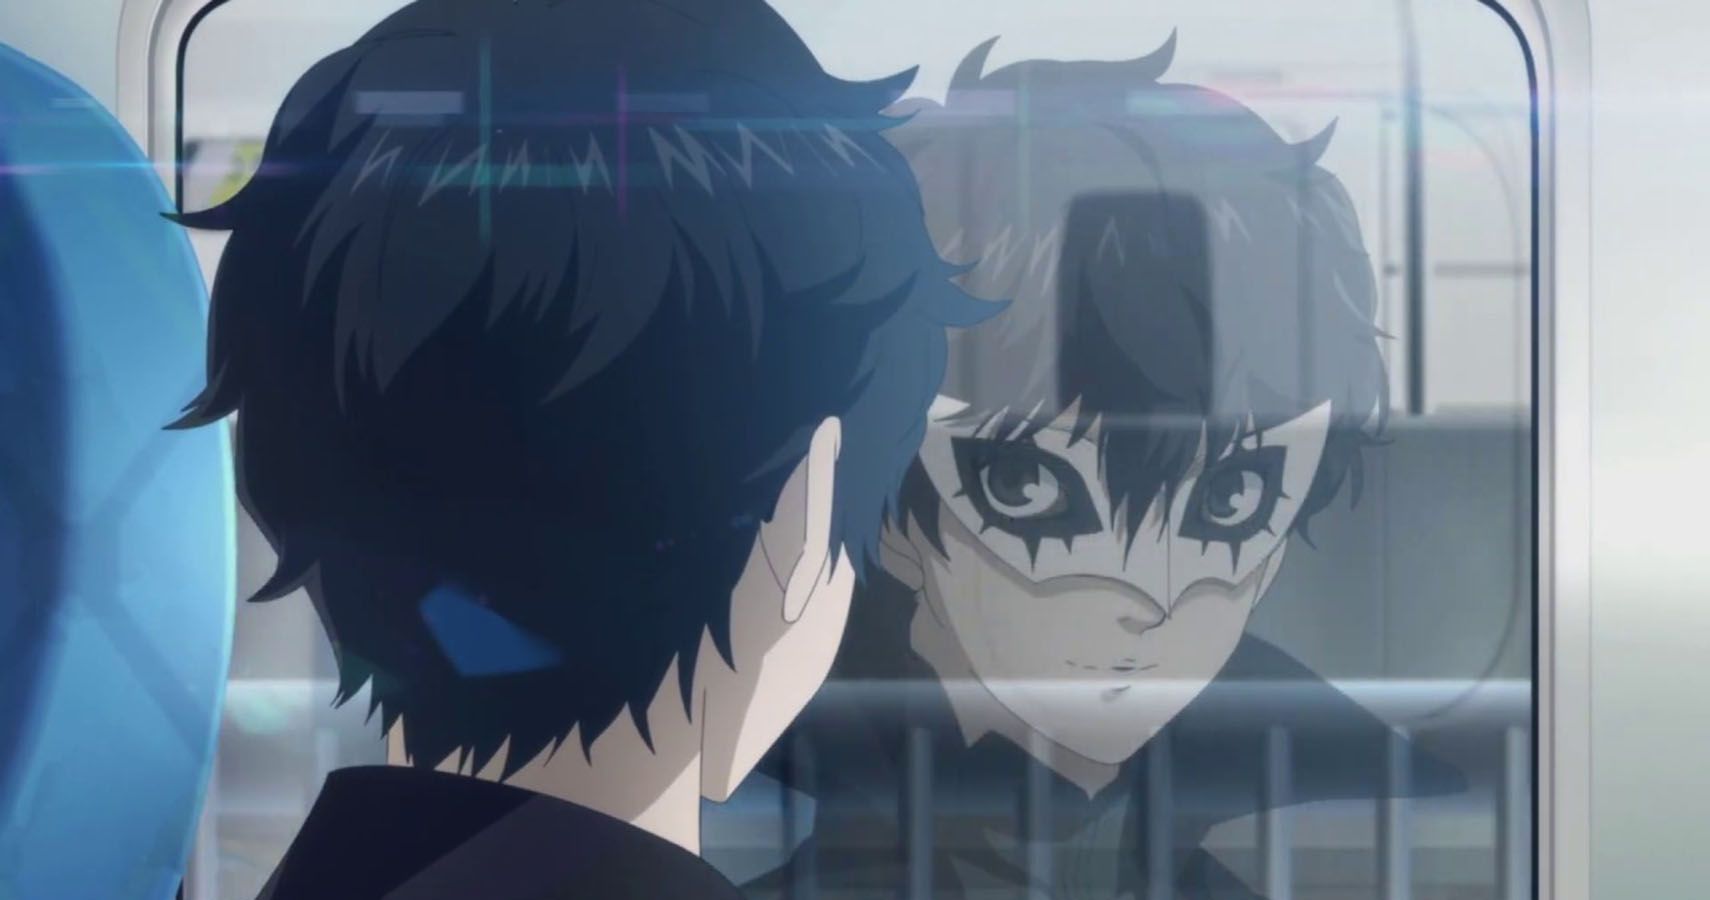 Persona 5 Royal good ending where the protagonist sees Joker in his reflection.